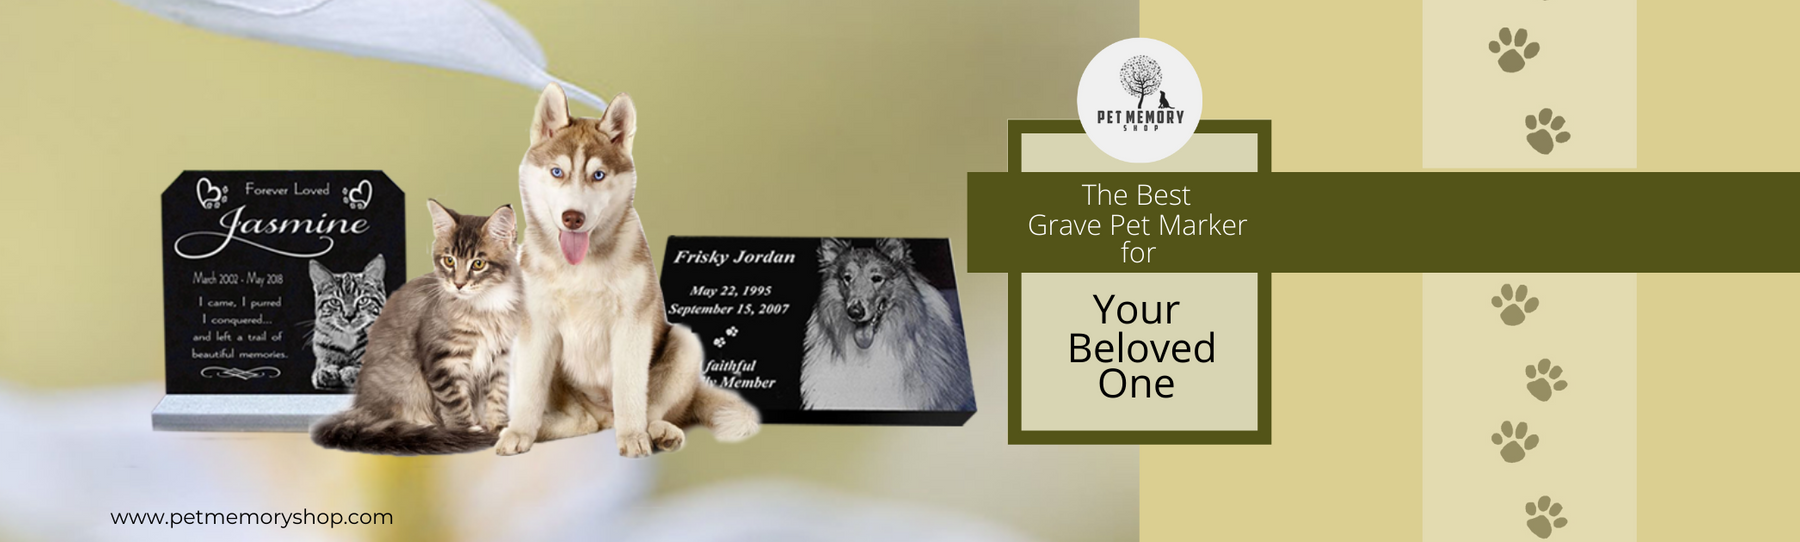 The Best Grave Pet Marker for Your Beloved One